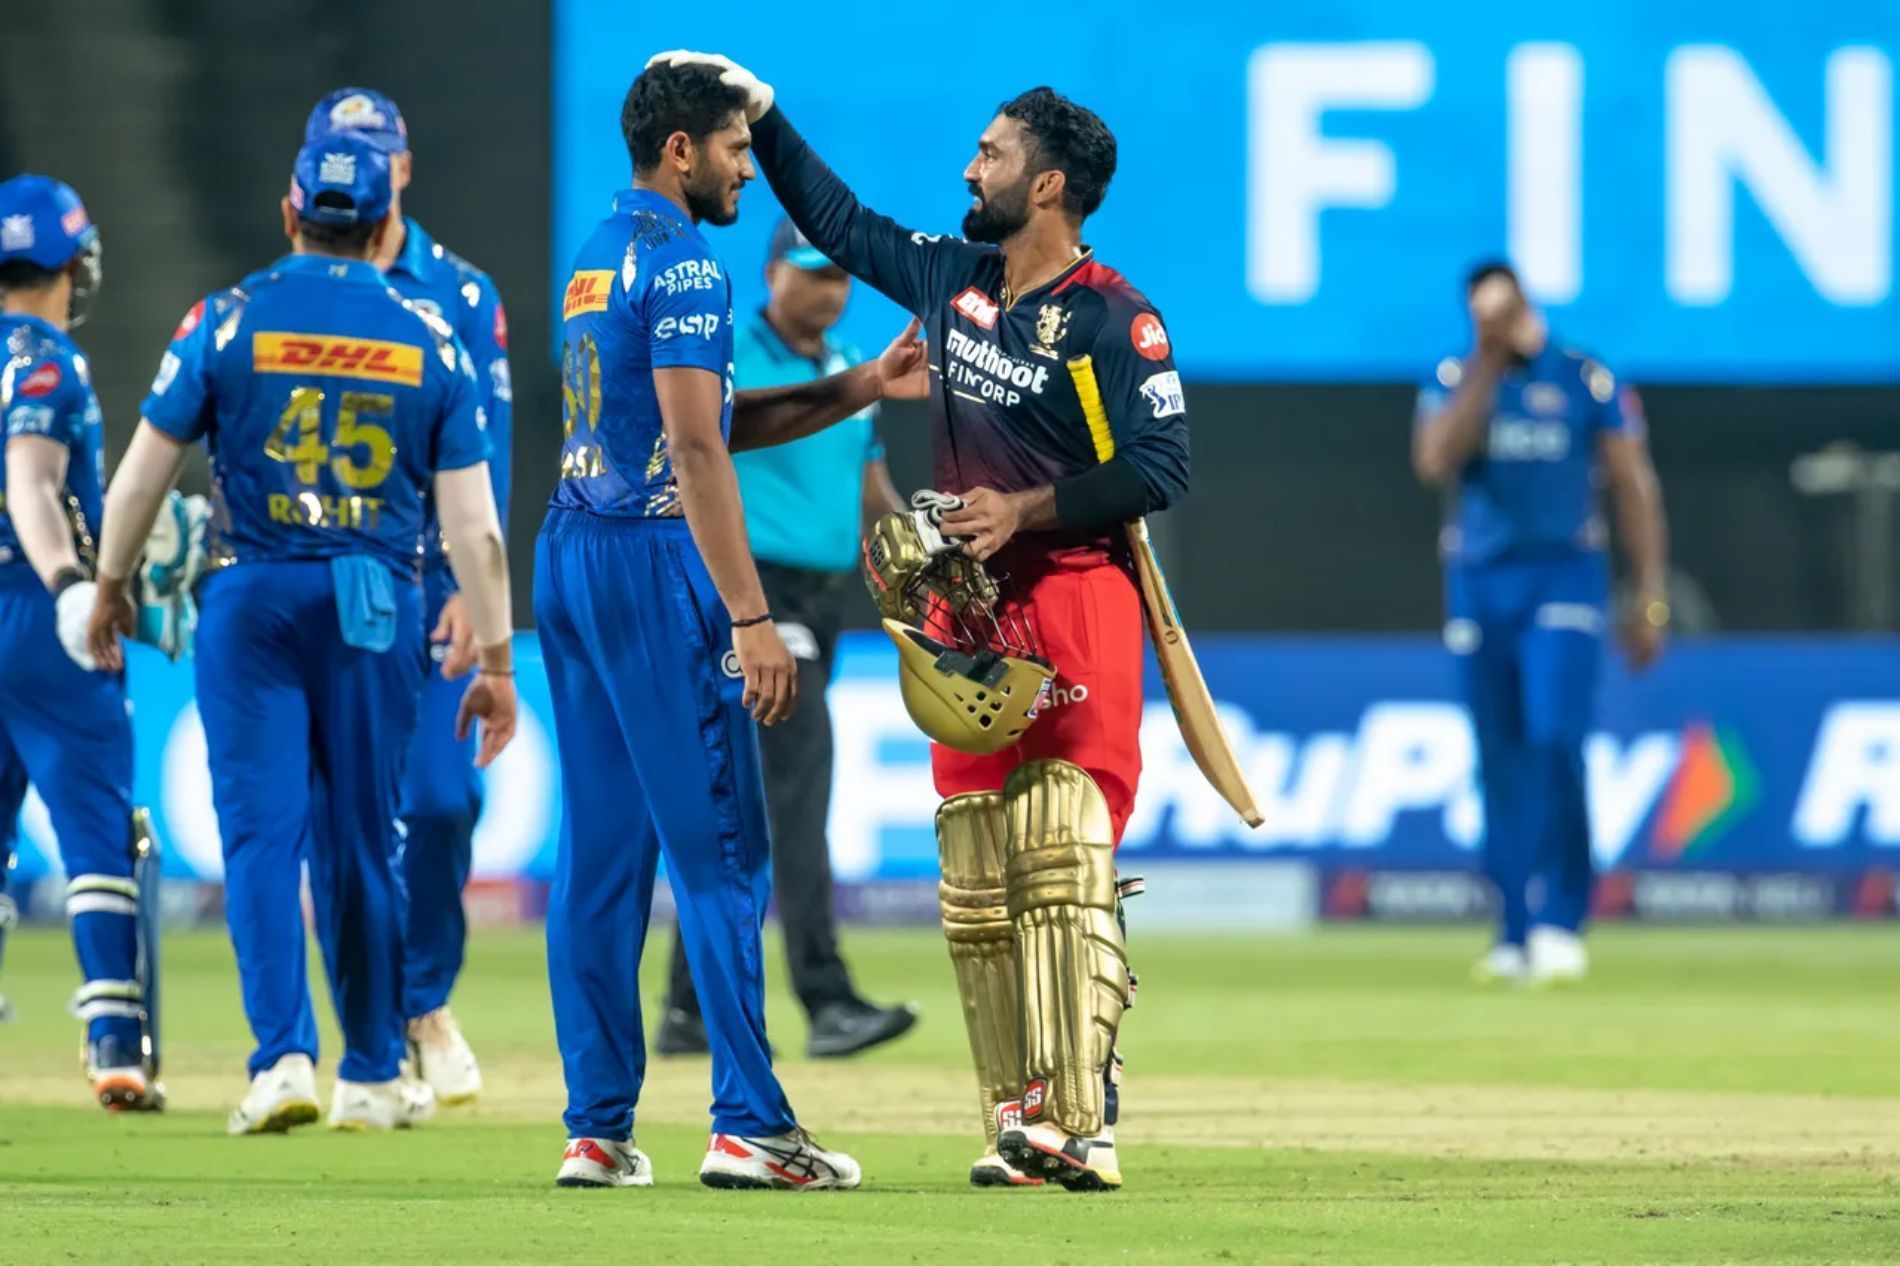 Dinesh Karthik has been destructive with the bat for RCB. After Match 18 against MI though he is seen in a caring avatar, playing big brother to Basil Thampi.